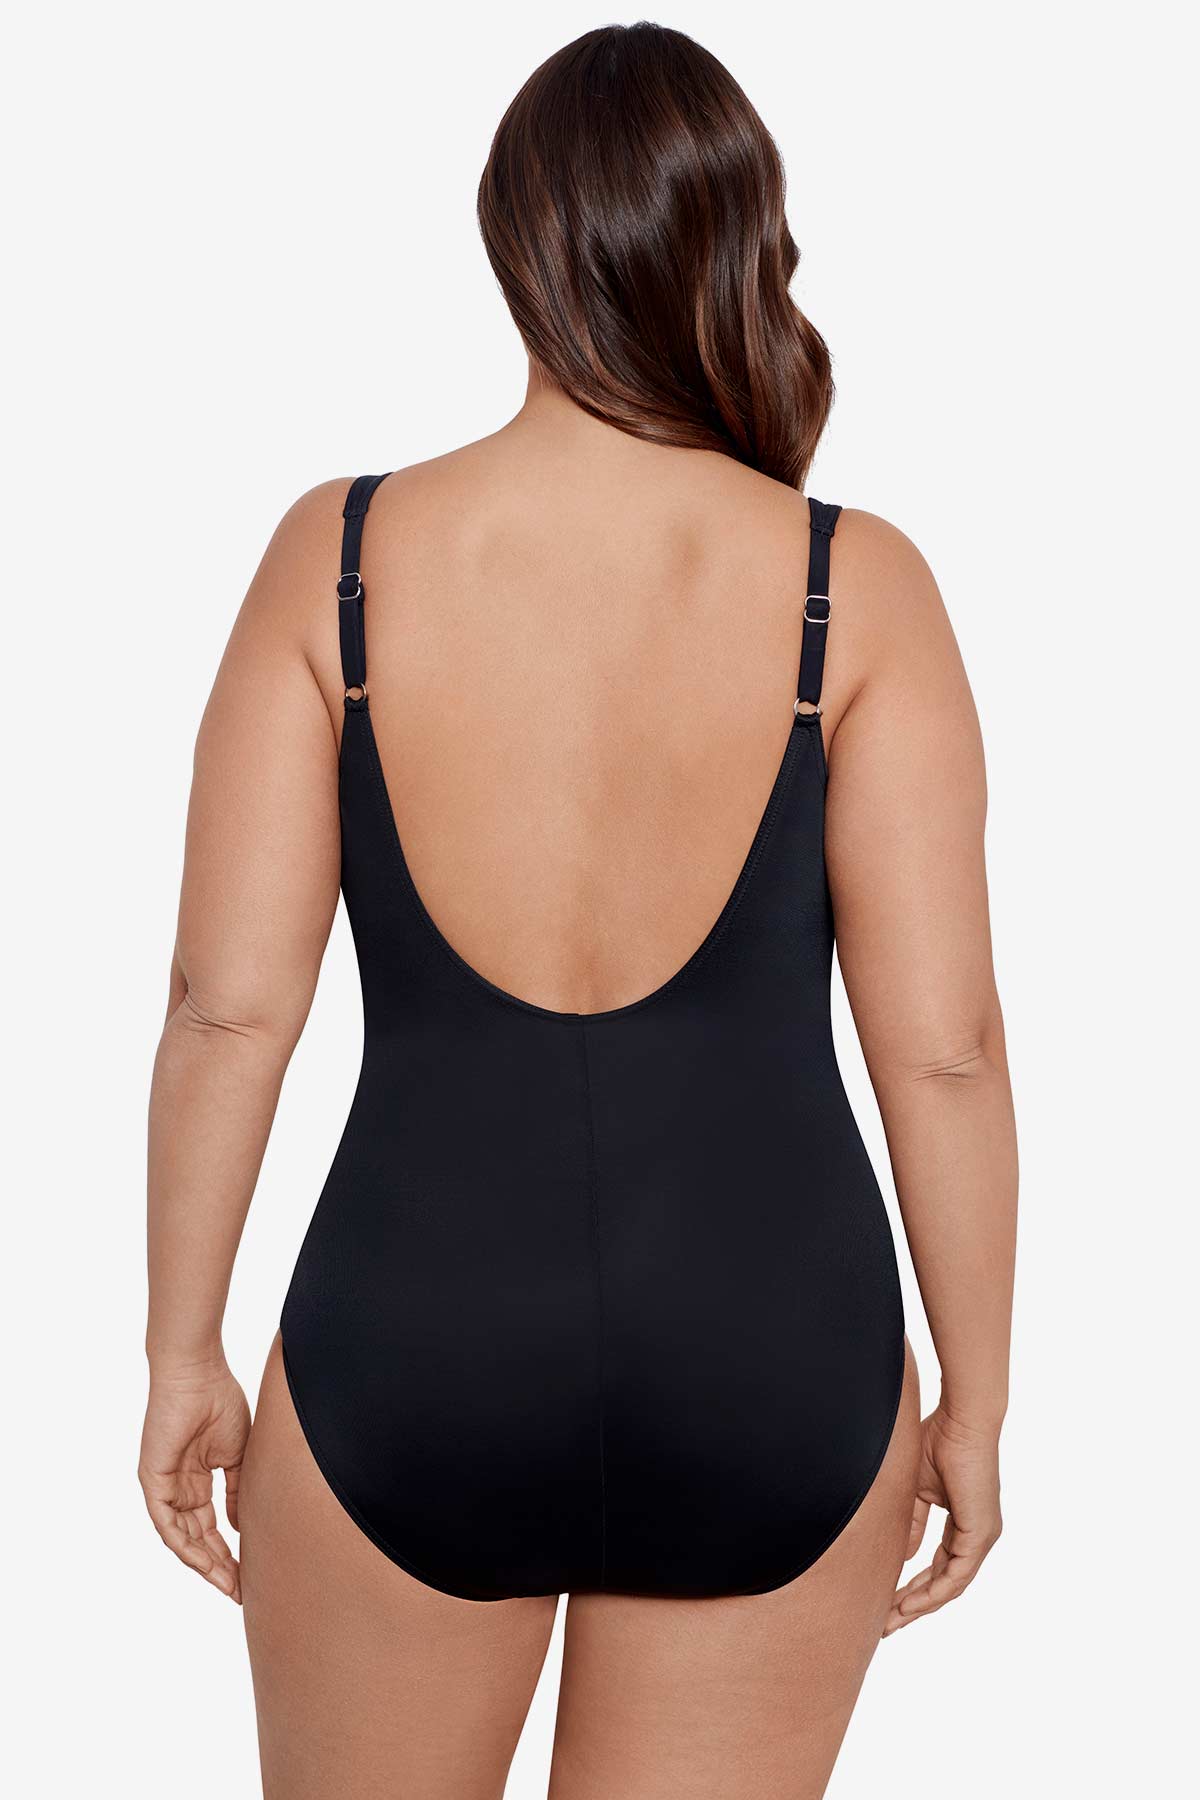 Dreamsuit by Miracle Brands Multi Color Black One Piece Swimsuit Size 22  (Plus) - 55% off